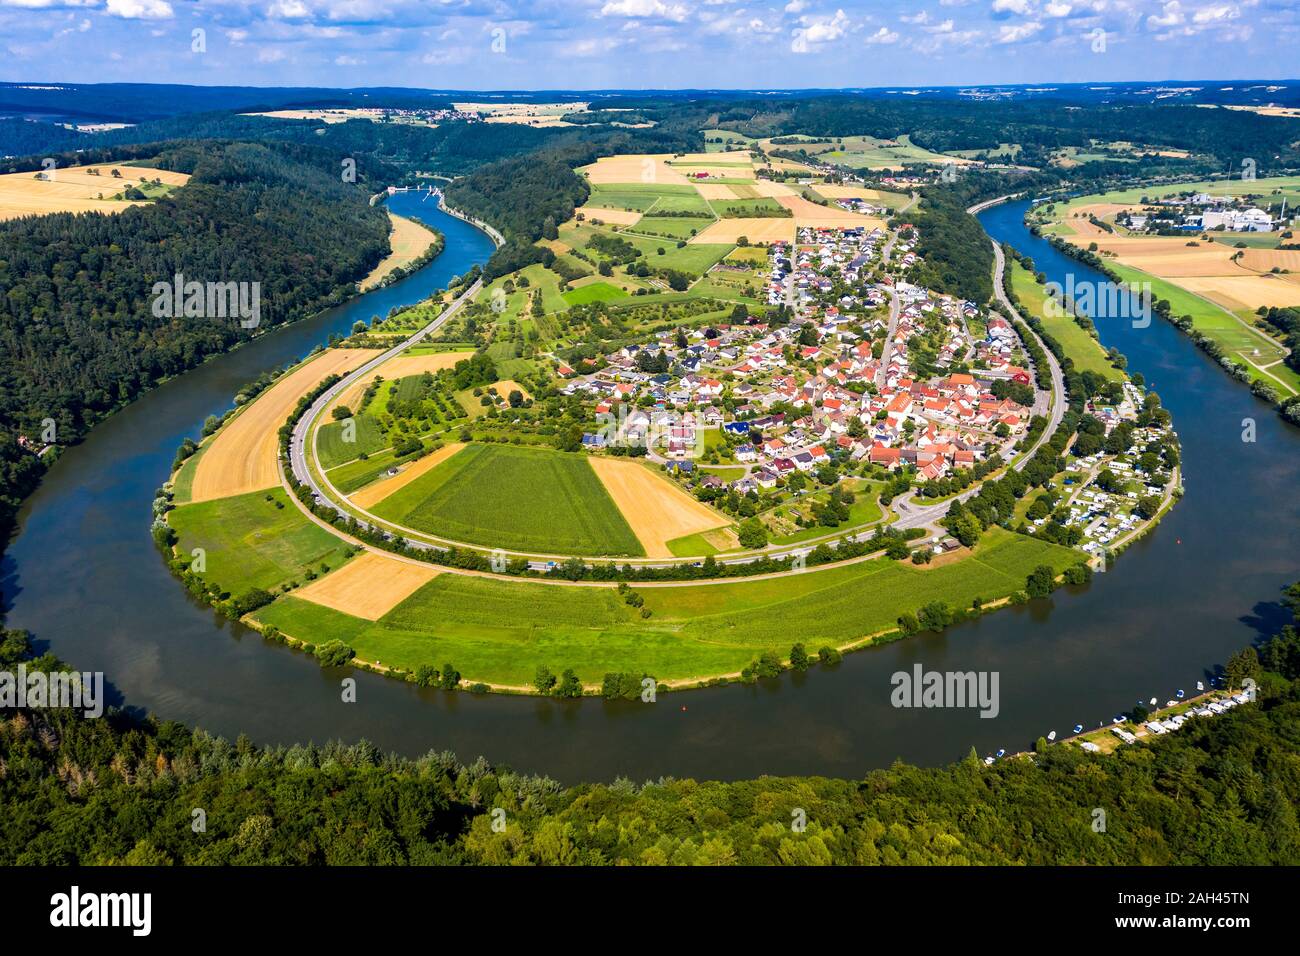 Germany, Bavaria, Binau, Aerial view of river curving around countryside town Stock Photo